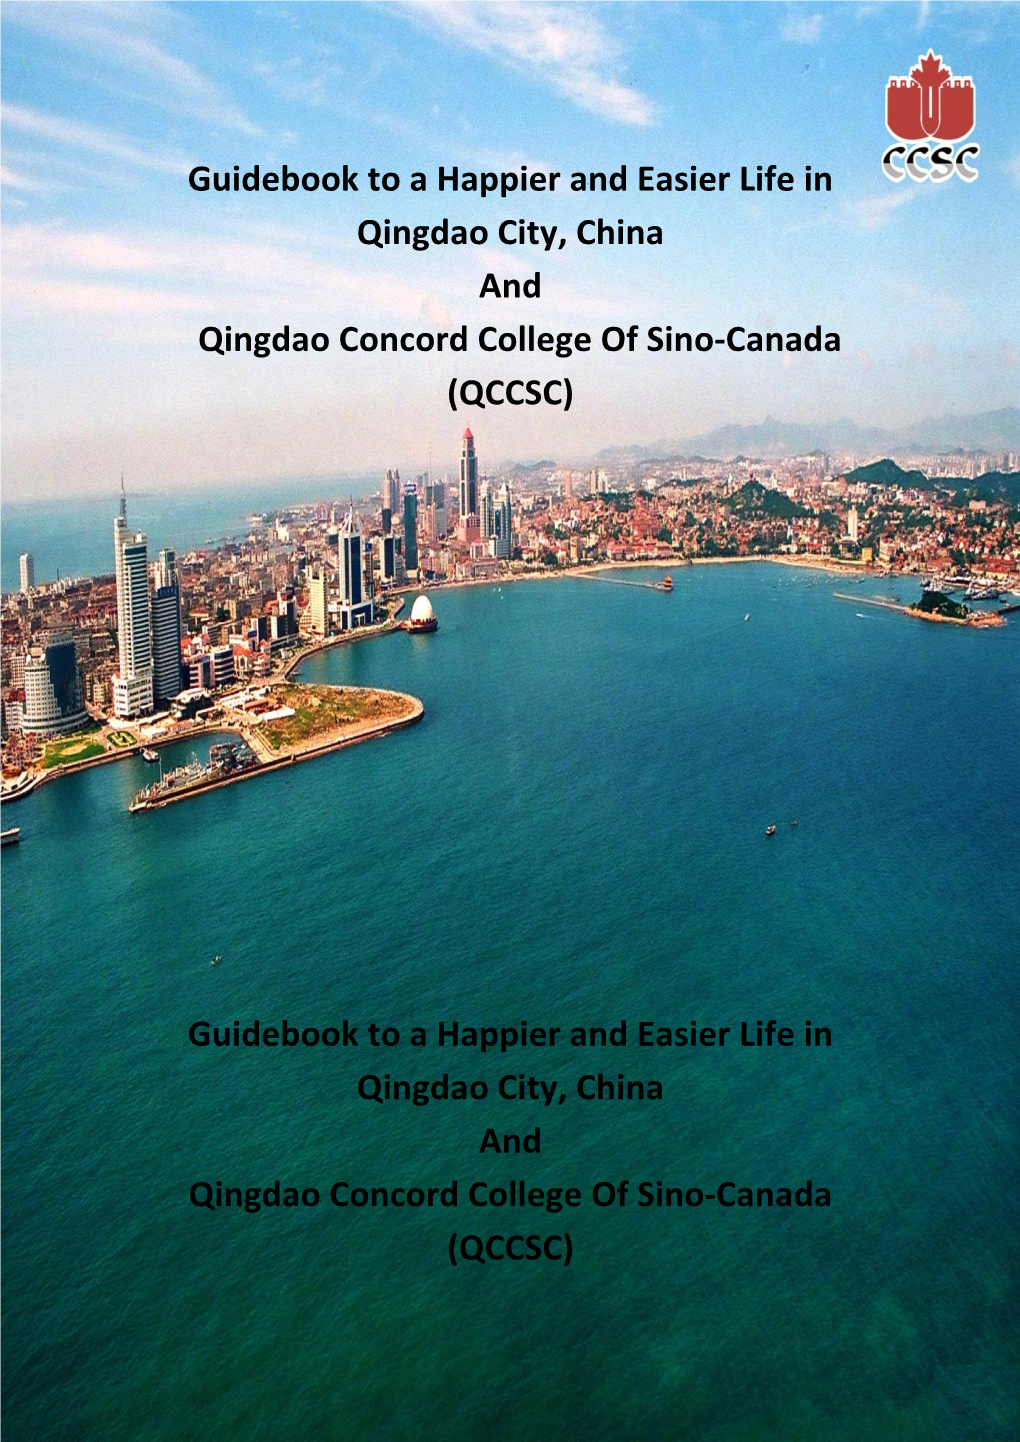 Guidebook to a Happier and Easier Life in Qingdao City, China and Qingdao Concord College of Sino-Canada (QCCSC)